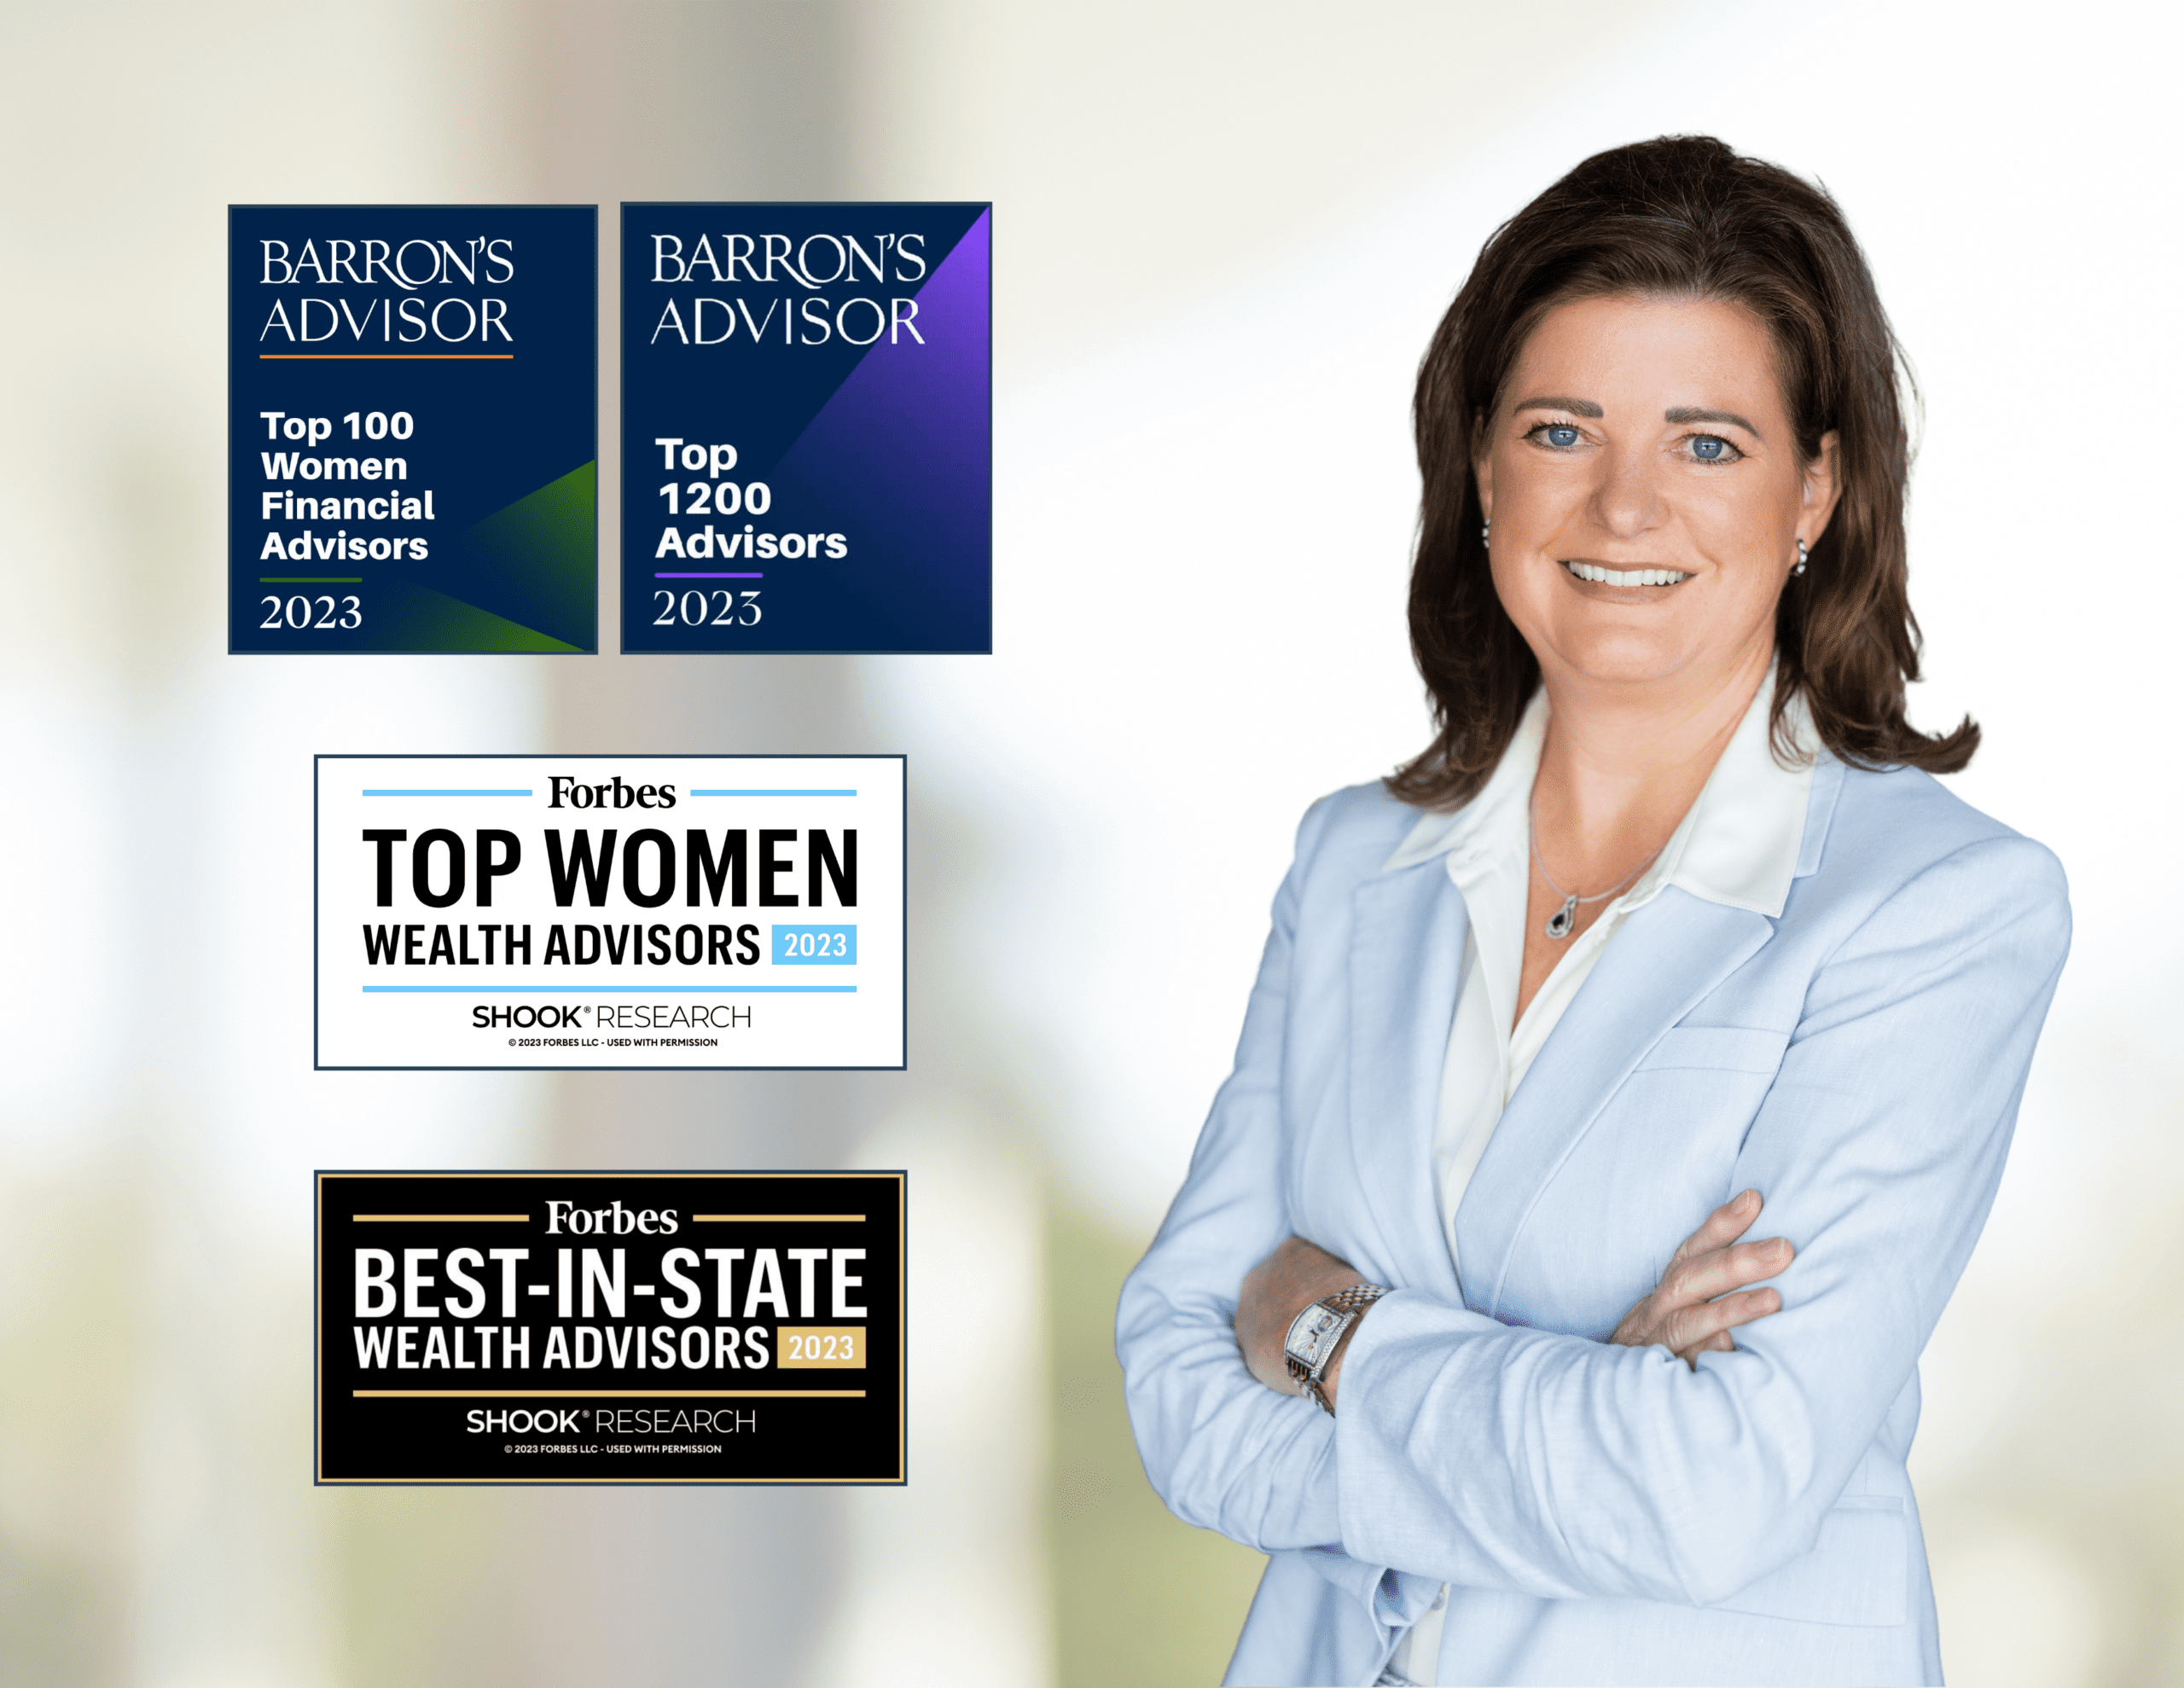 Diane Compardo Recognized Four Times in 2023 as a Top Advisor by Barron’s and Forbes